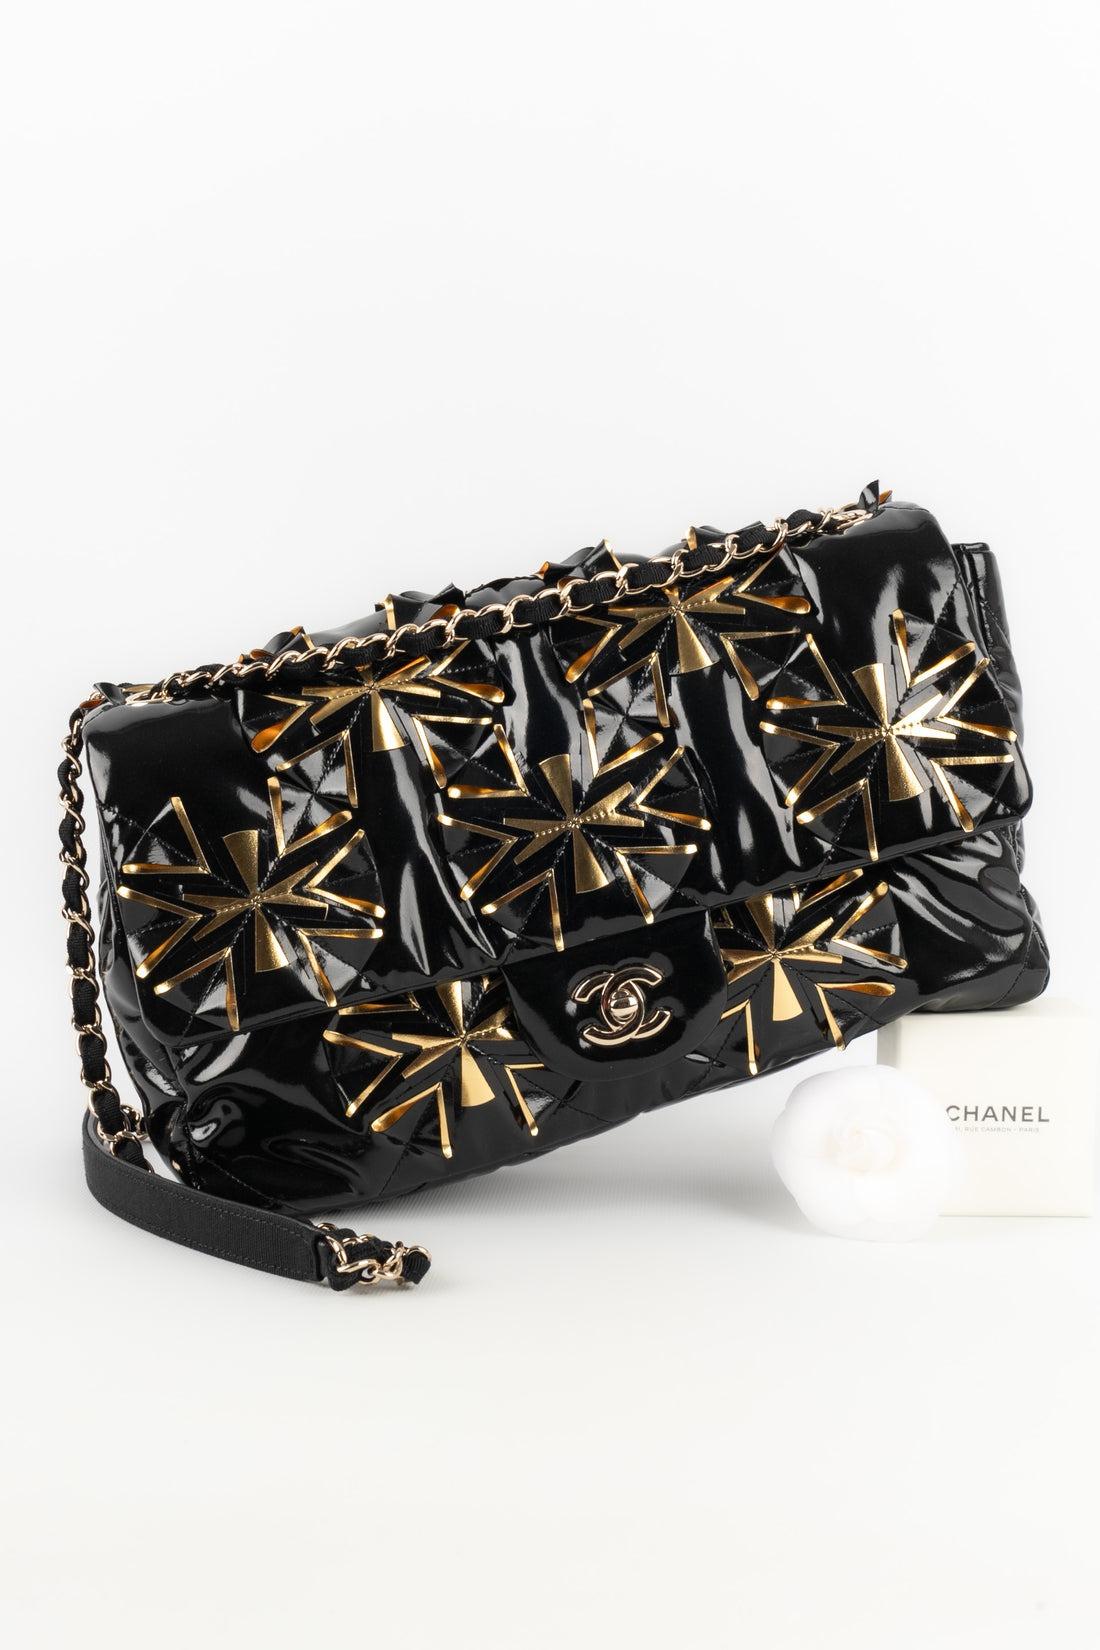 Chanel - (Made in France) Black and golden flexible patent leather bag. Golden metal elements. Sold with the serial number and certificate of authenticity. 2019 Collection.

Additional information:
Condition: Very good condition
Dimensions: Length: